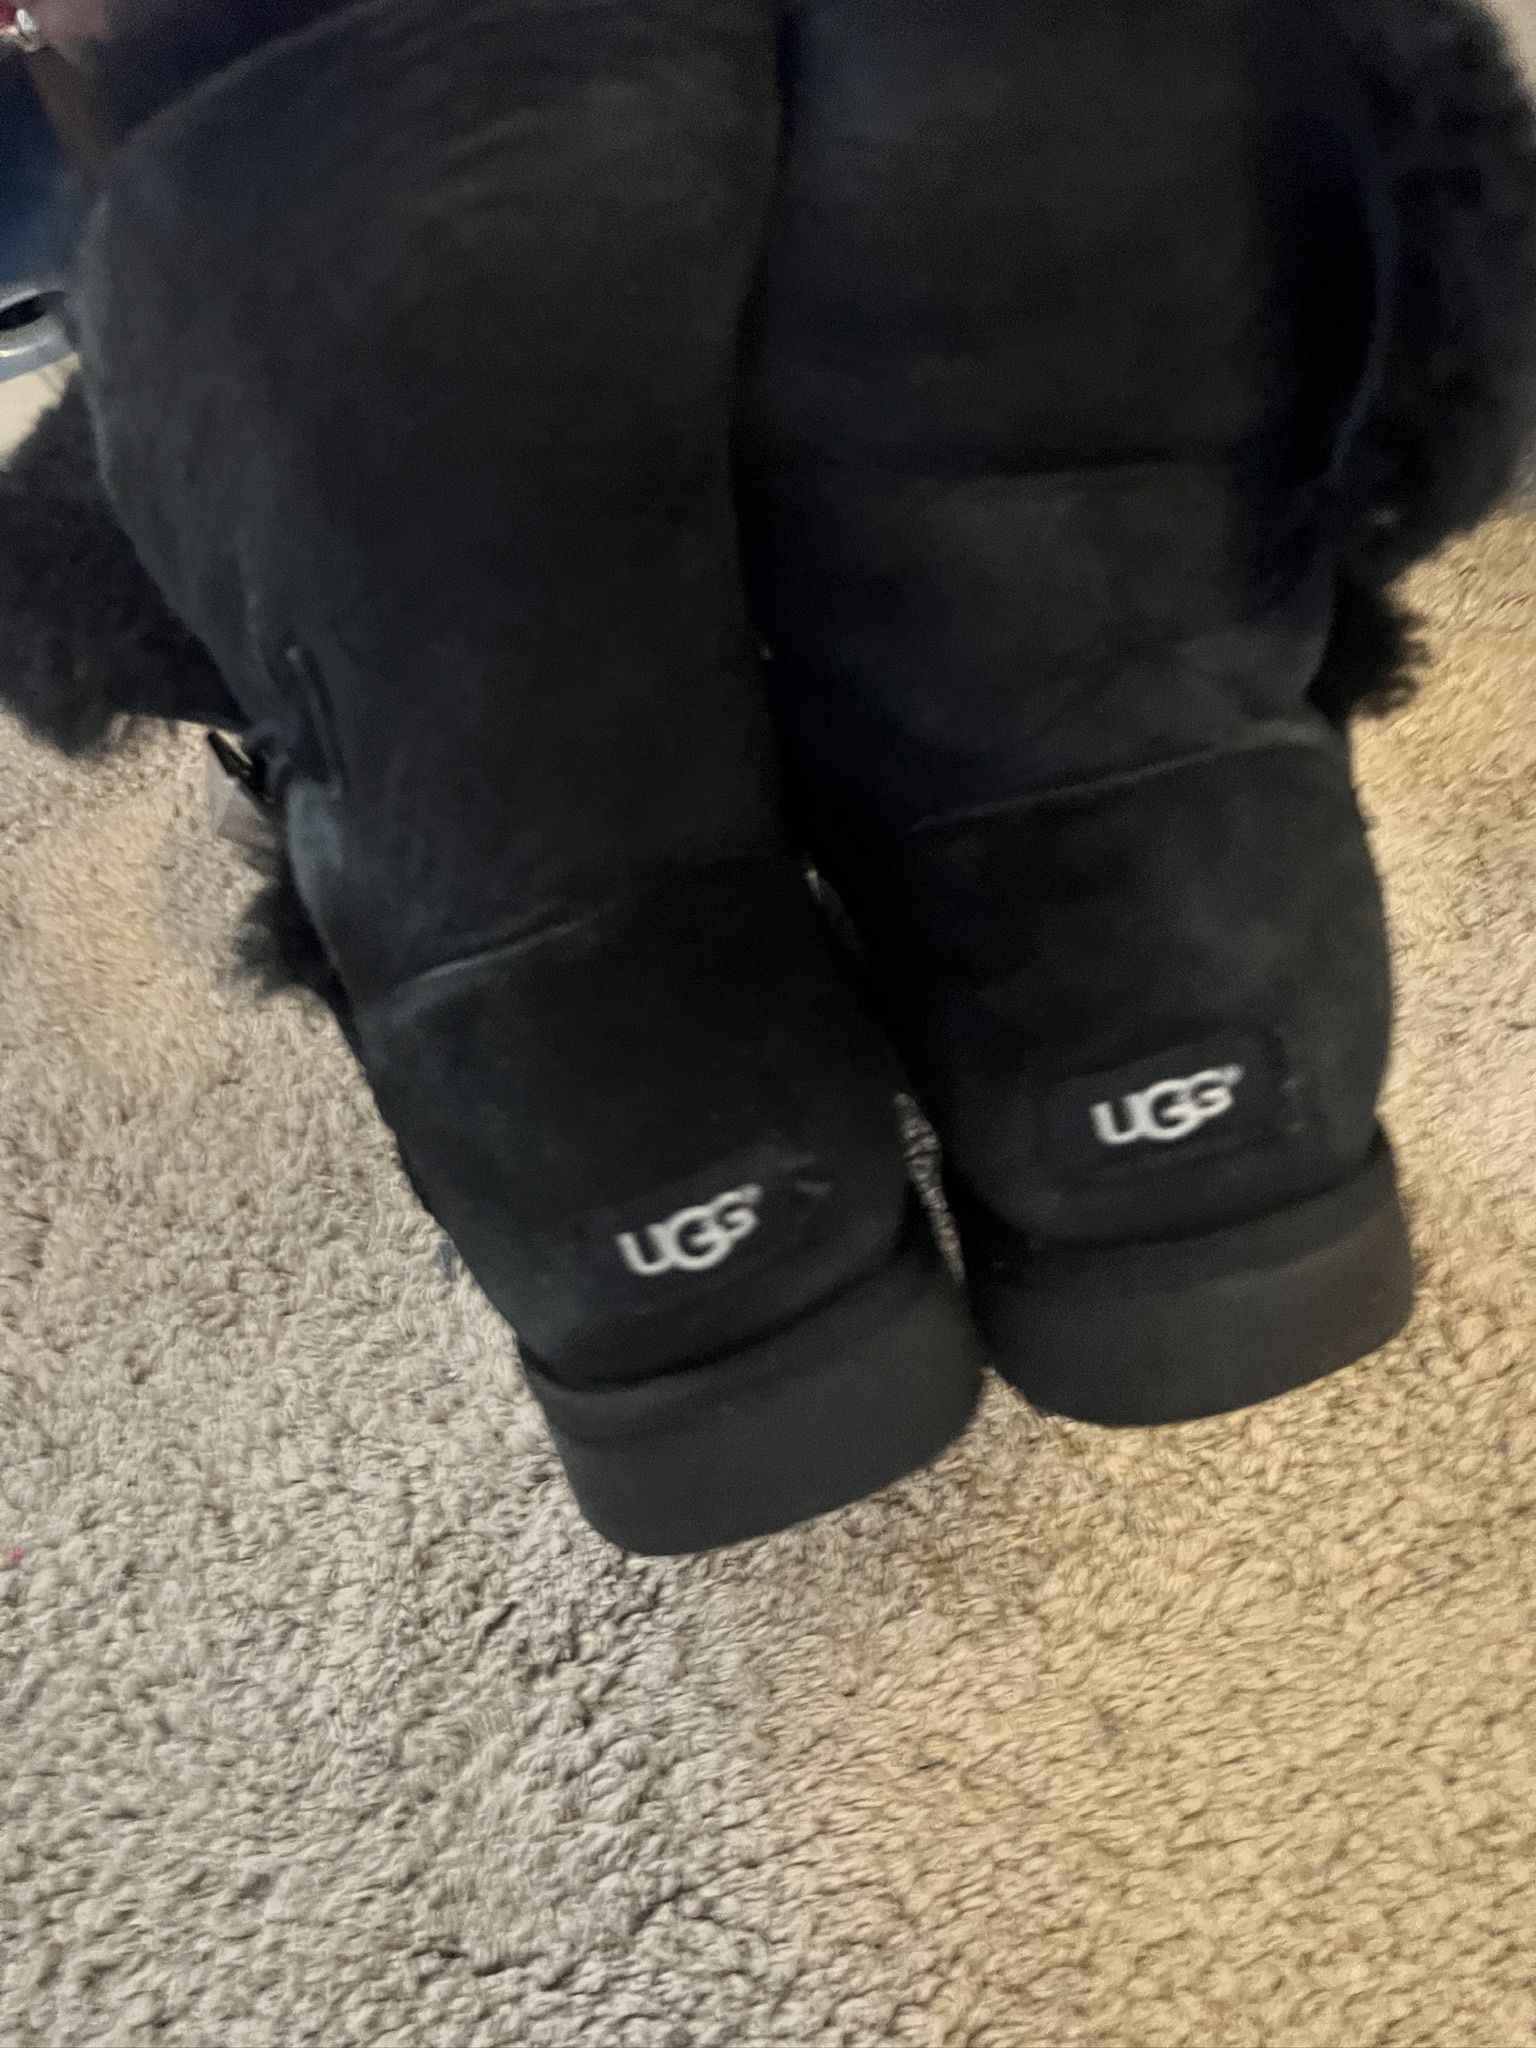 Woman Size 11 Black Ugg Boots 